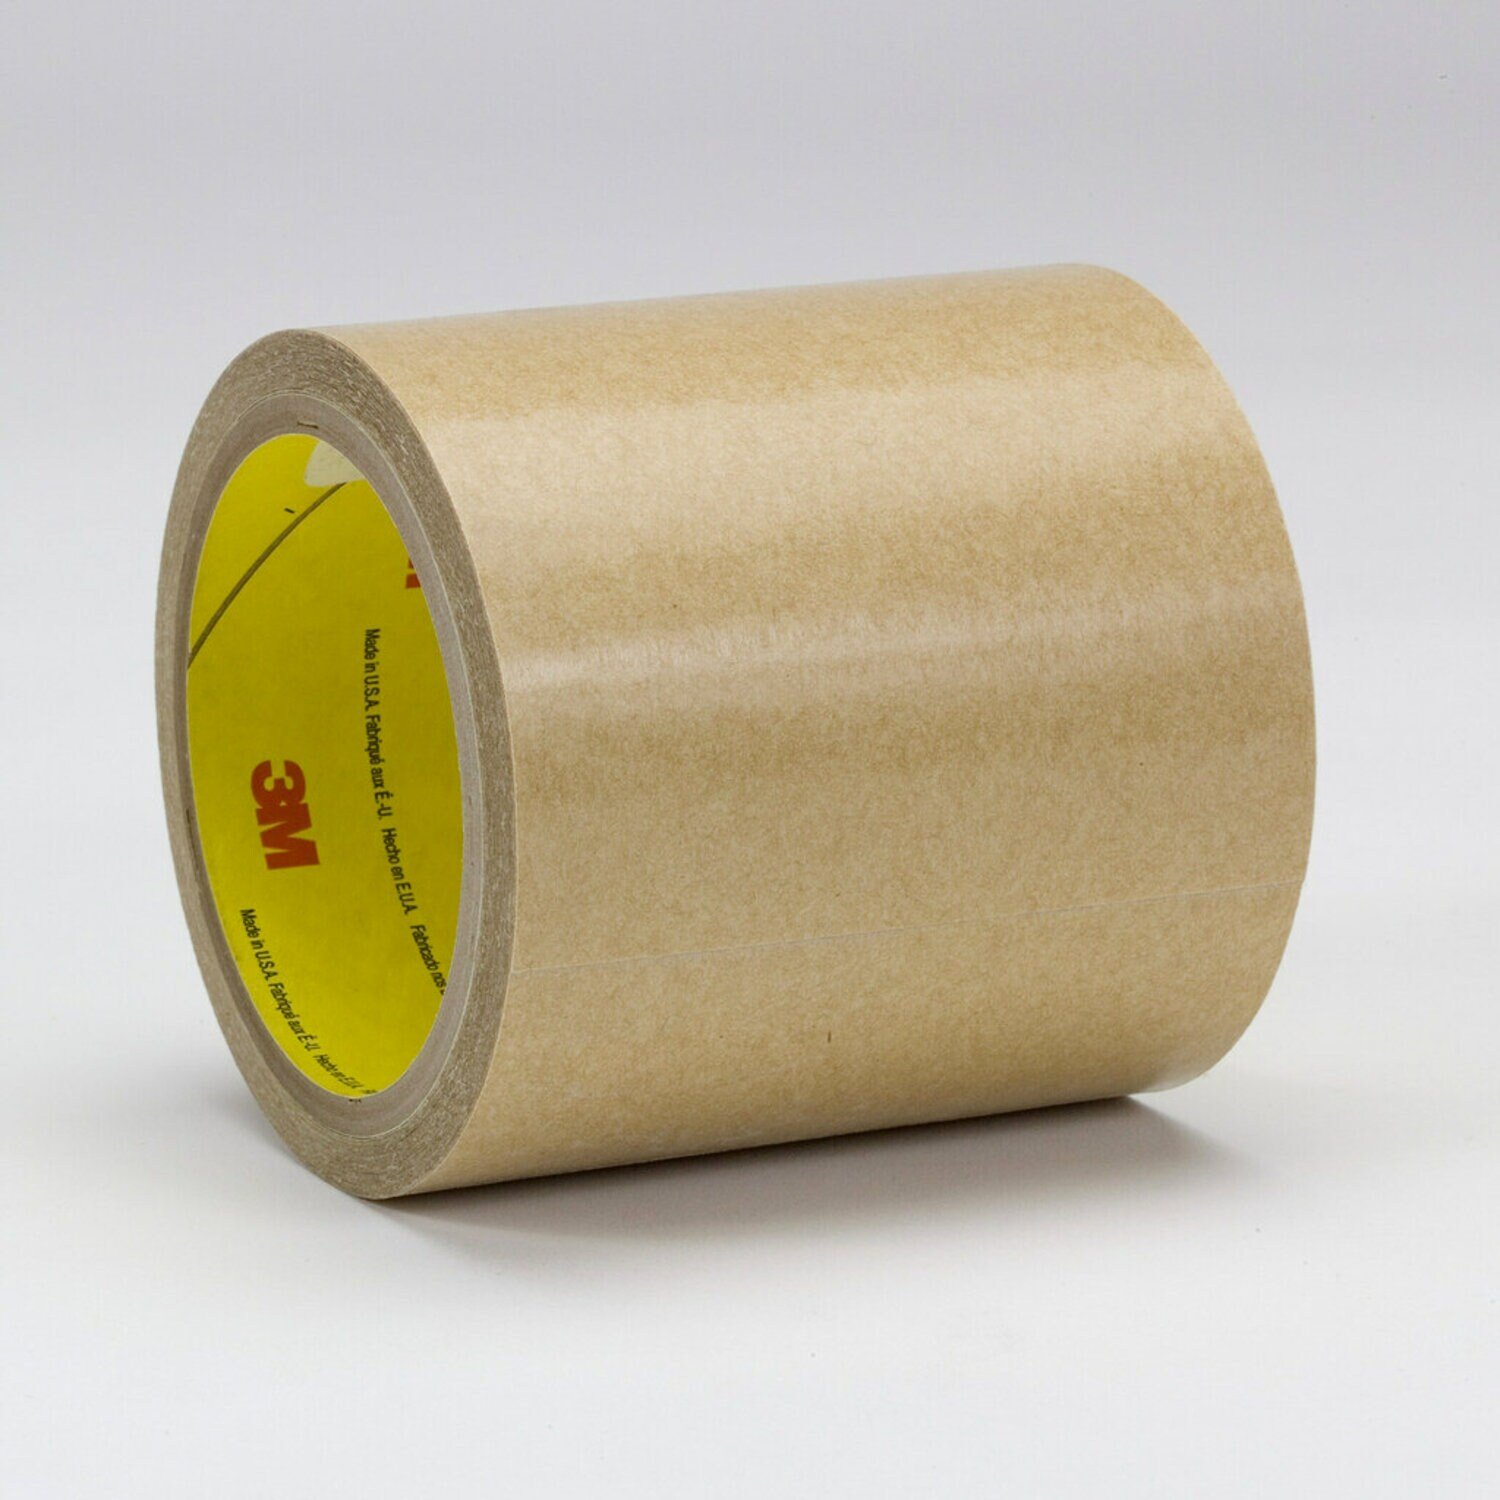 7000001344 - 3M Adhesive Transfer Tape 9458, Clear, 48 in x 60 yd, 1 mil, 1 roll per
case